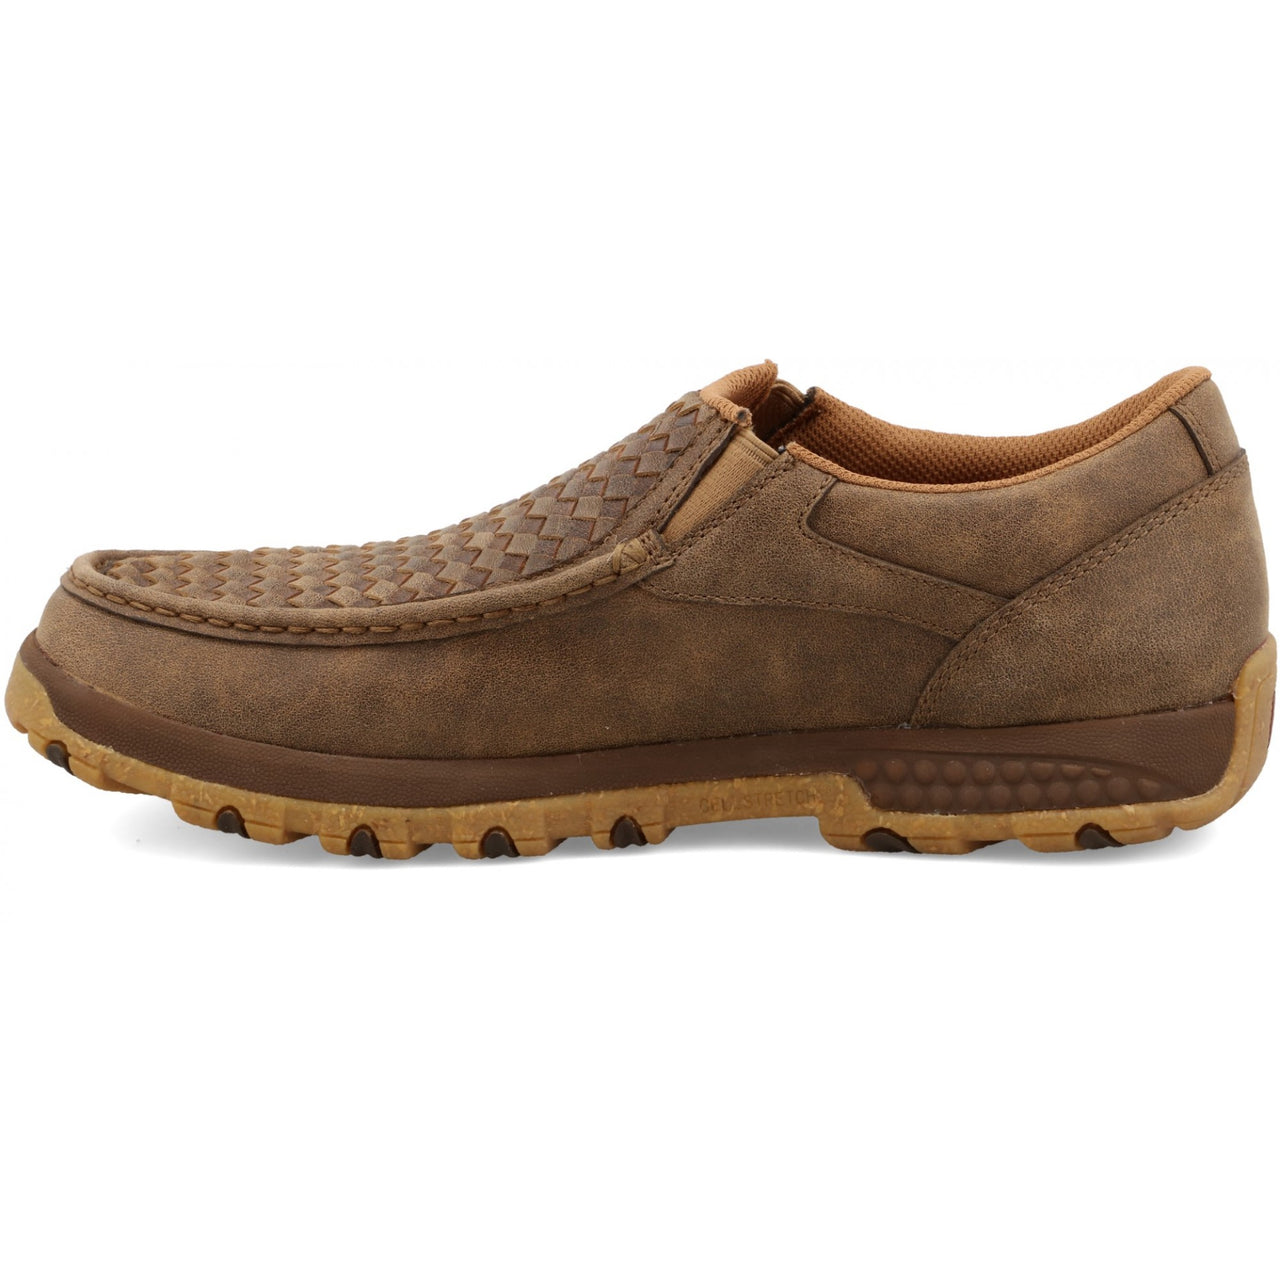 Twisted X Men's Cellstretch Slip-On Driving Moc D Toe Shoes - Brown